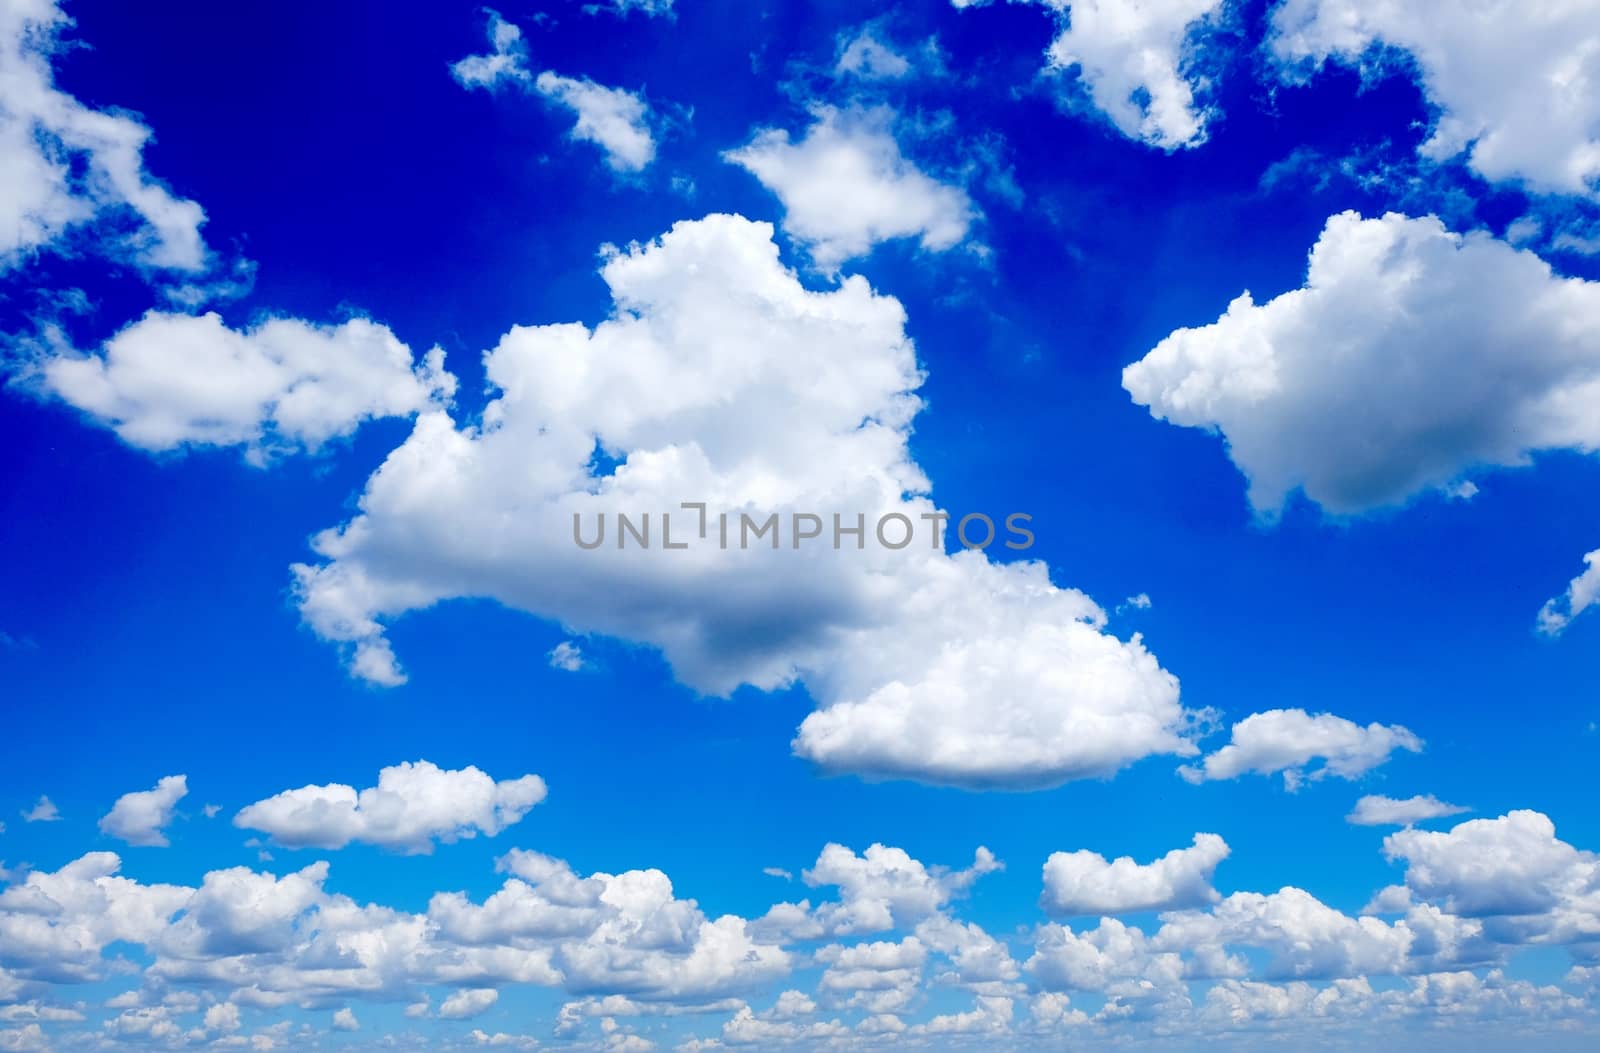 Paoramic view with clouds on a blue sky background